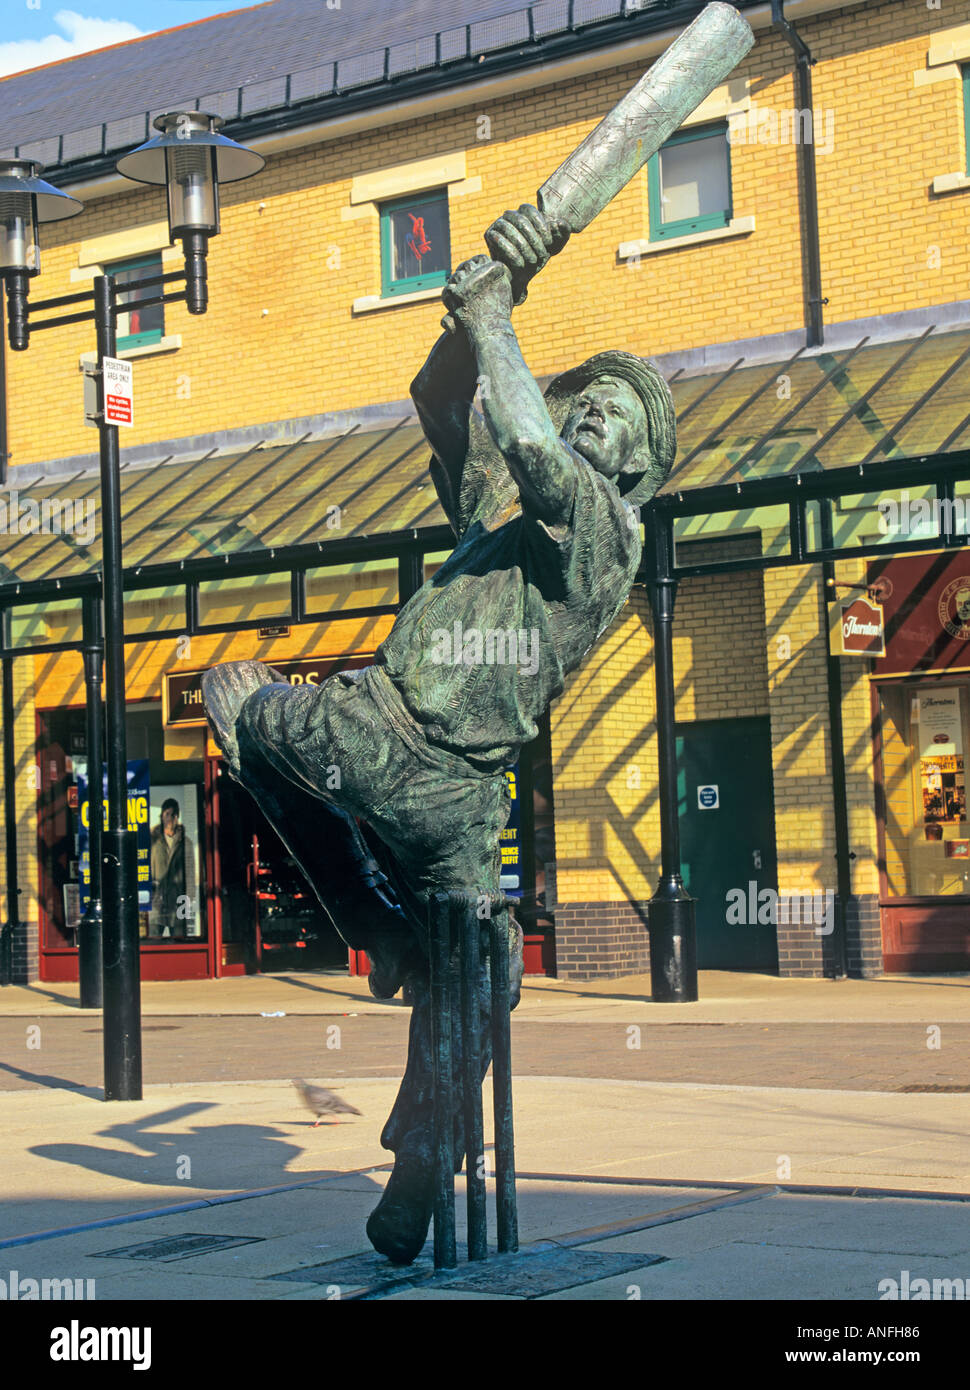 HASTINGS EAST SUSSEX UK Sculpture of the Spirit of Cricket by Allan Sly  unveiled by HM the Queen 6/6/97 Stock Photo - Alamy